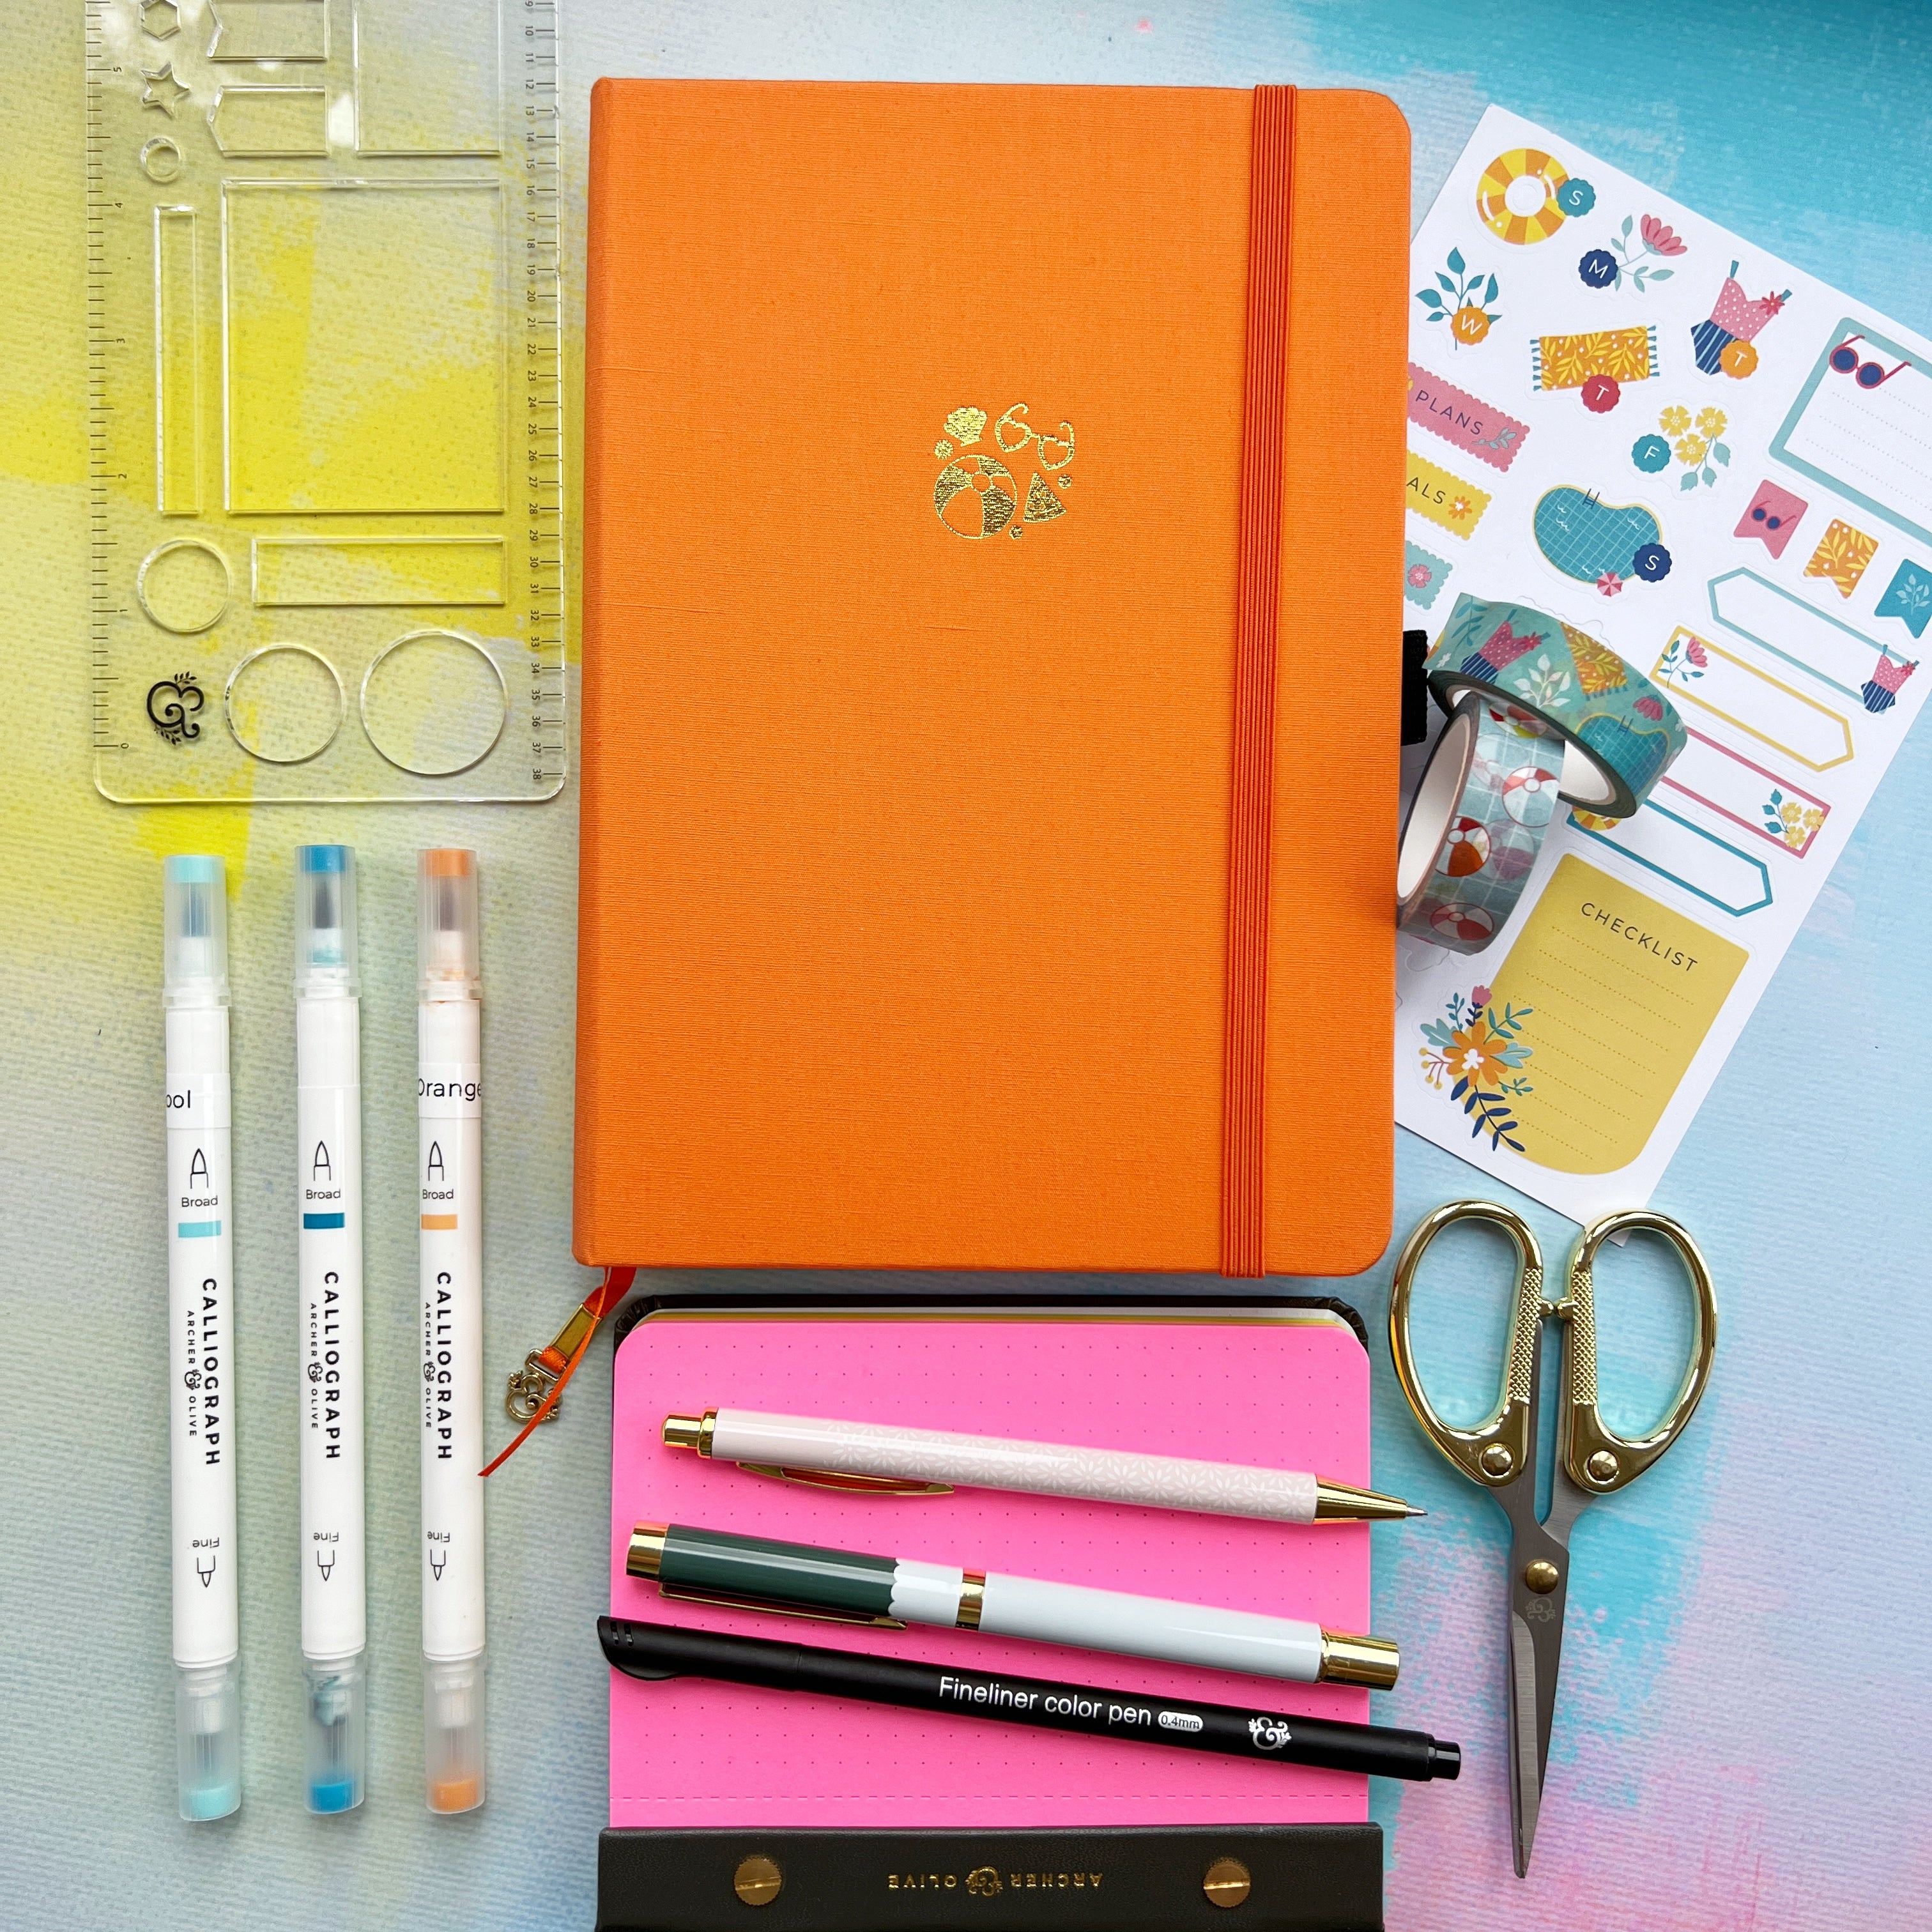 Orange journal with pens, rulers, stickers and scissors